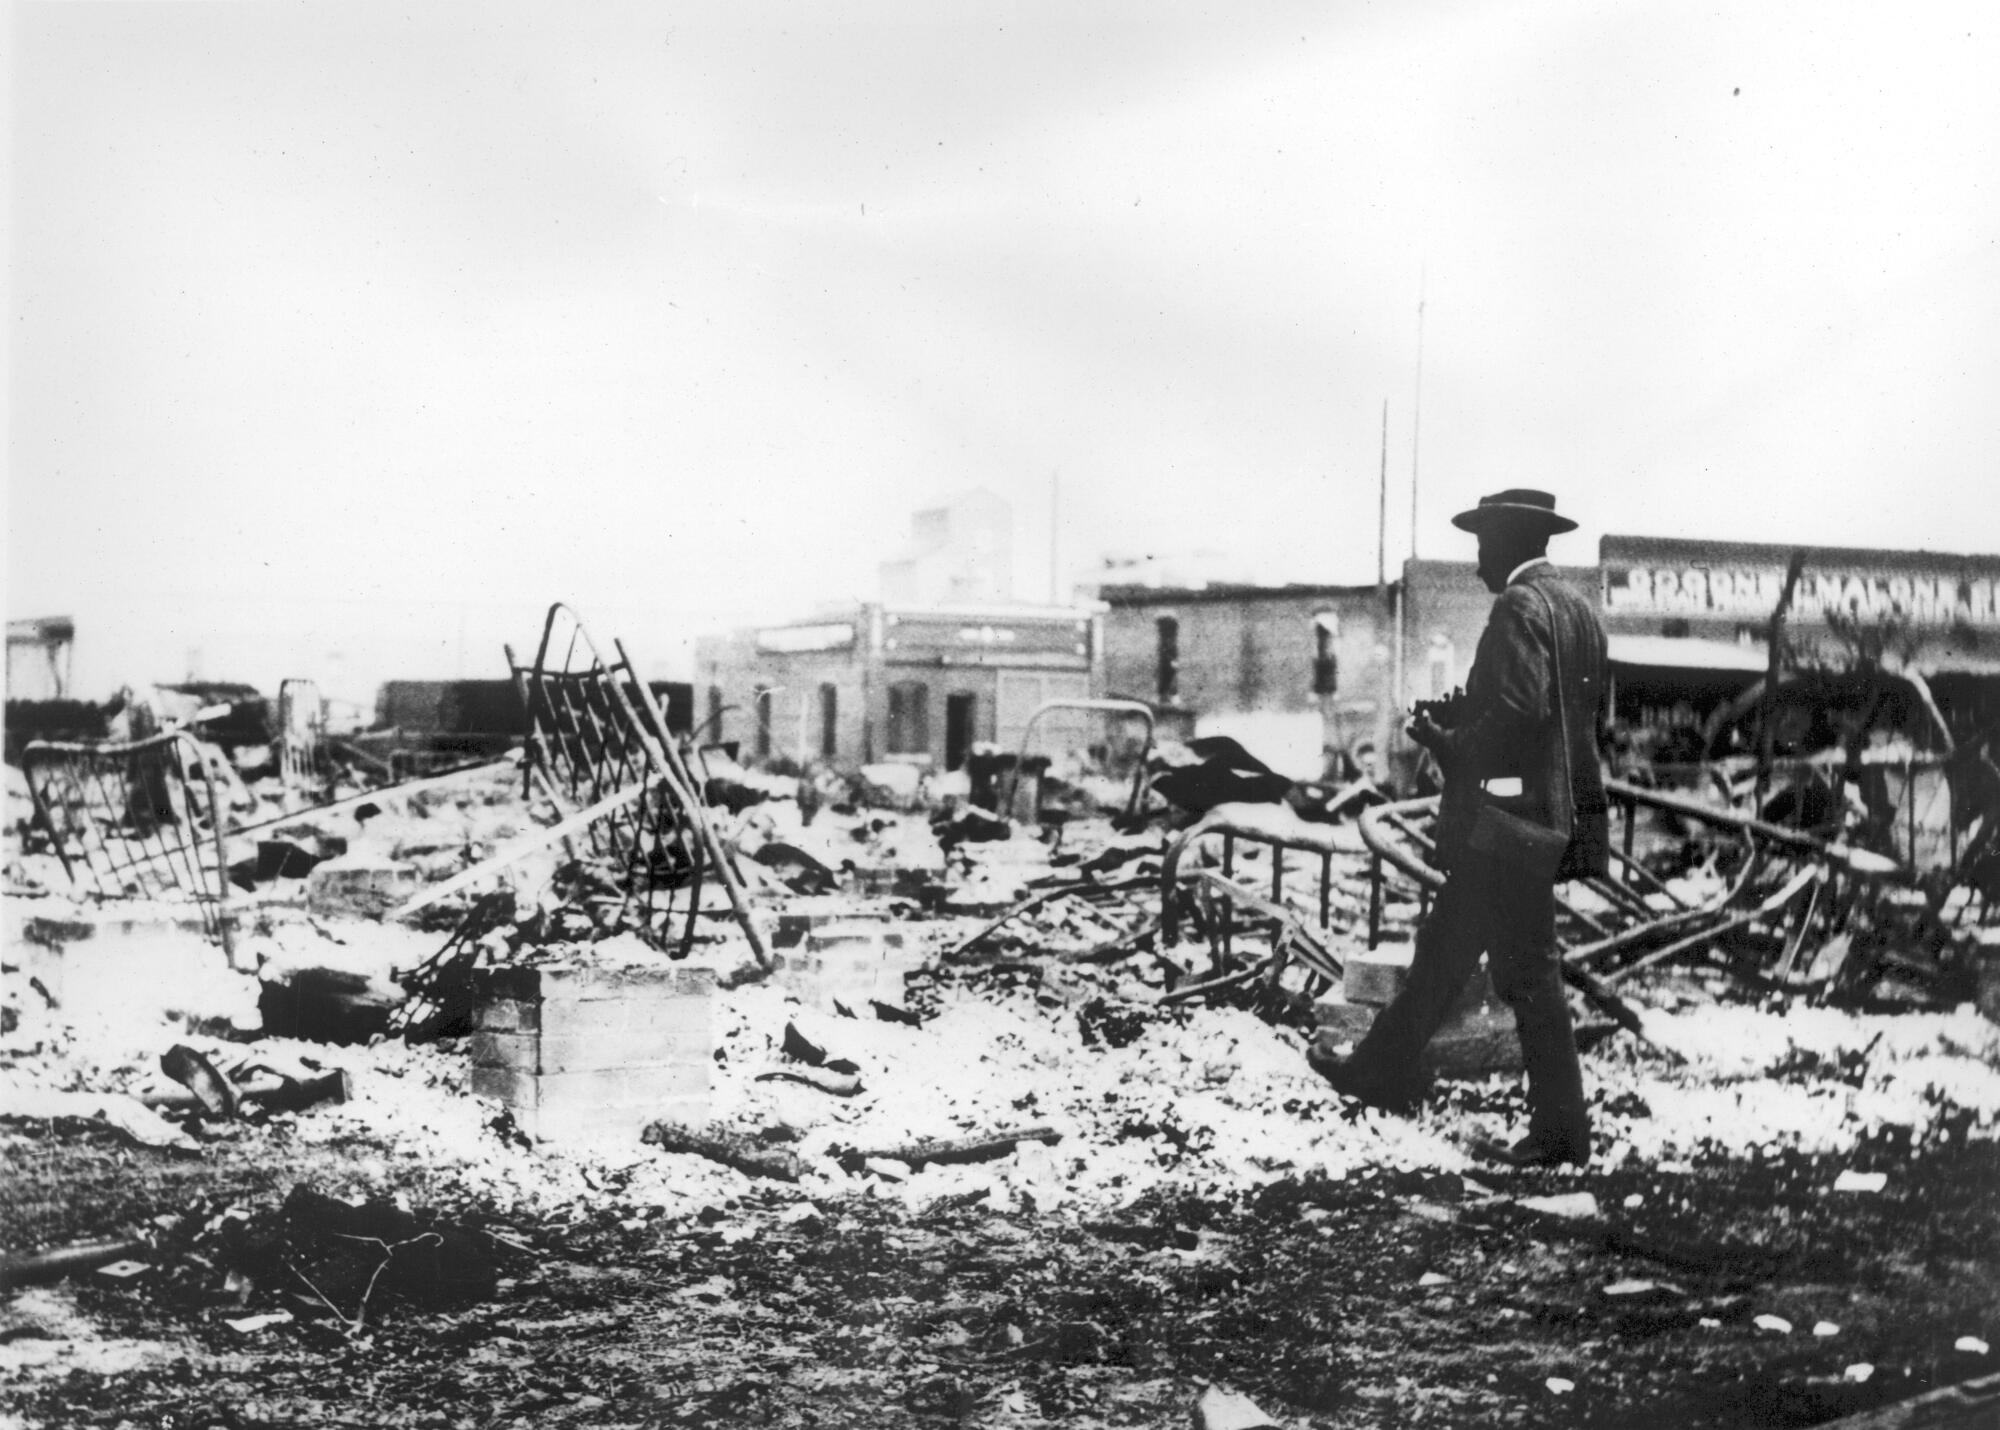 A man looks over the remains of buildings after the attack on Tulsa's Greenwood neighborhood in 1921.